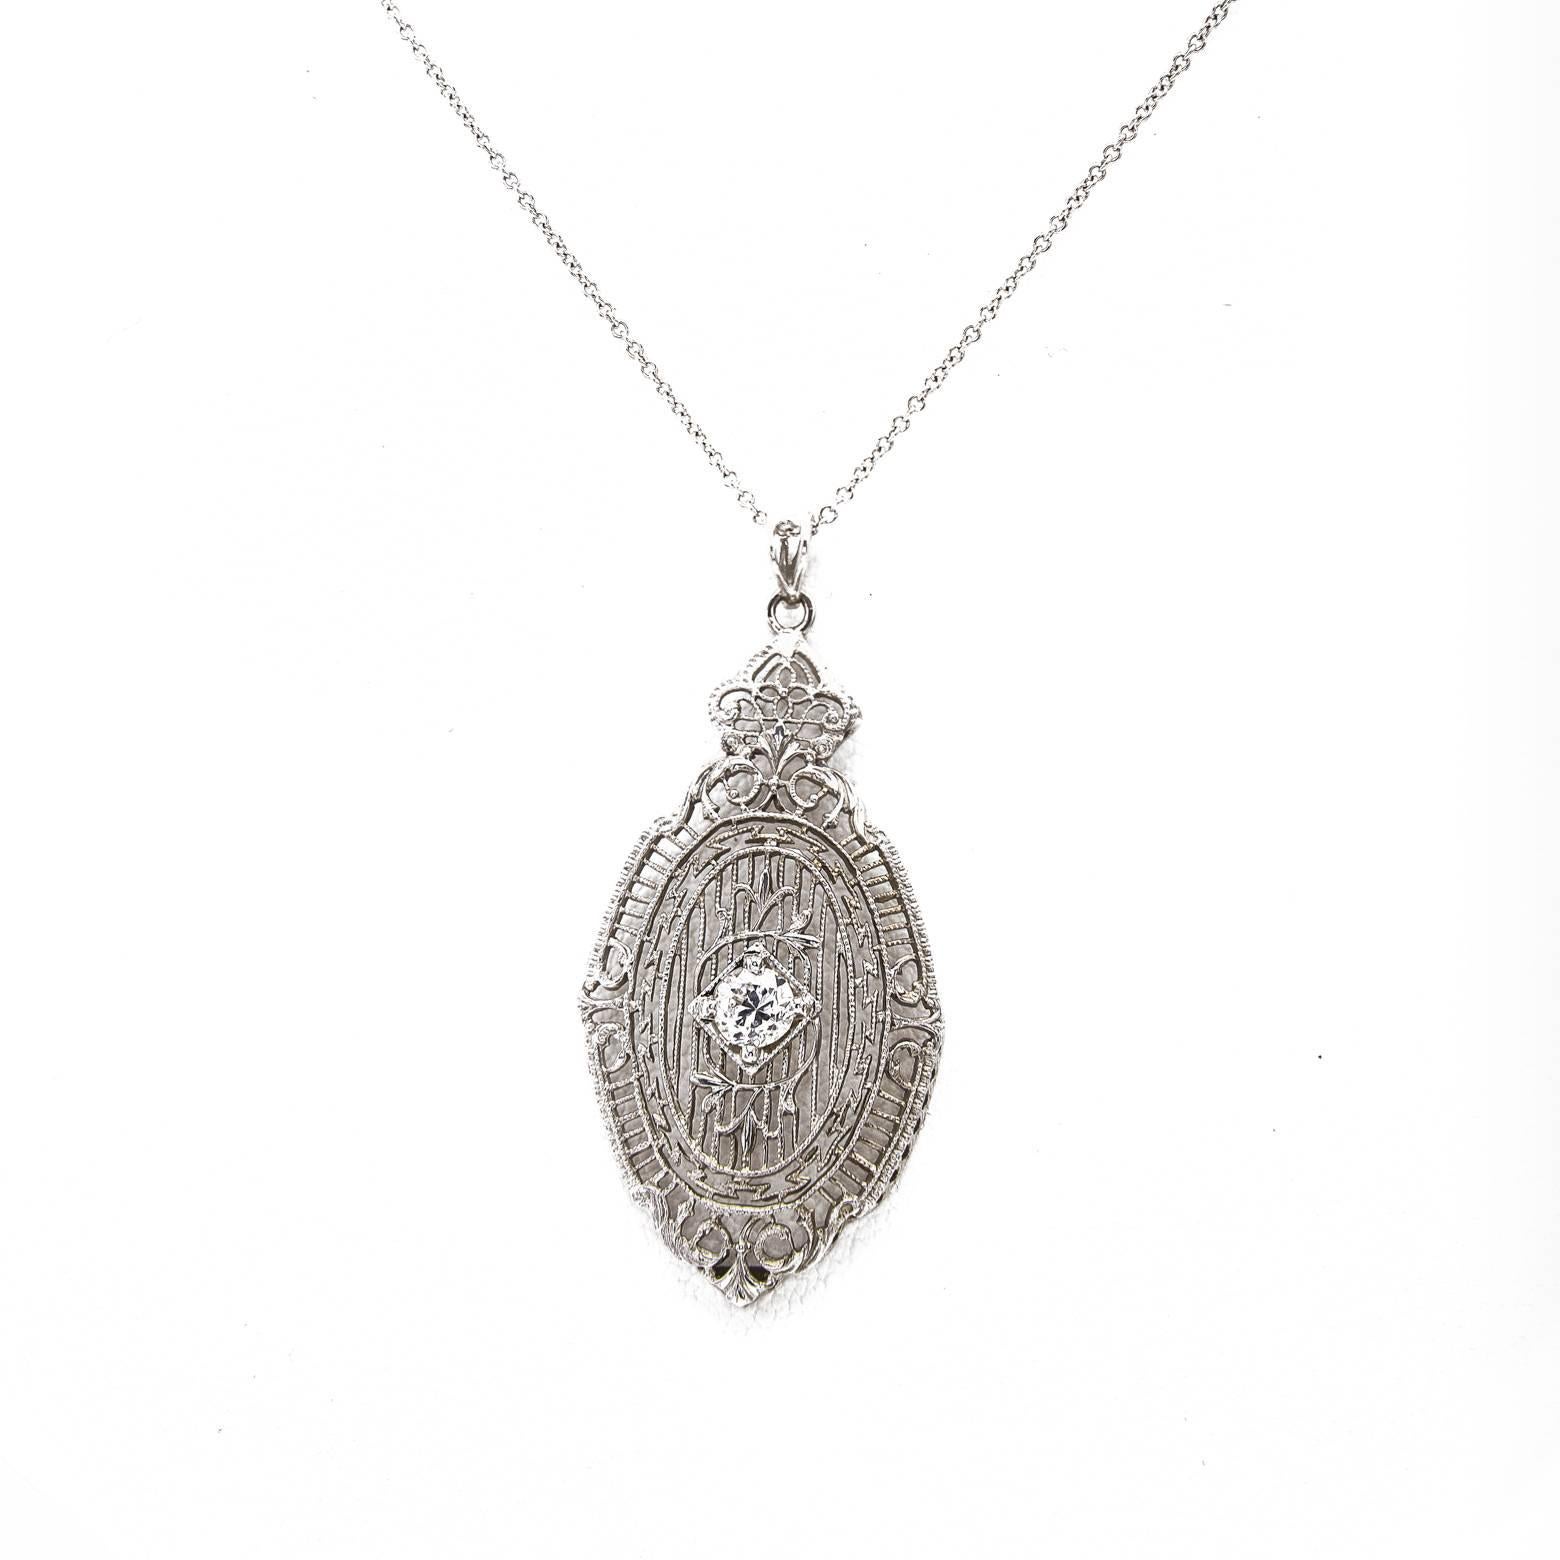 Lace-like and strong this quarter carat Diamond pendant glows with the delicate intricacy and excellent craftsmanship. Handmade in the 1920's when filigree was very popular the designer created a unique addition with a floral frame around the